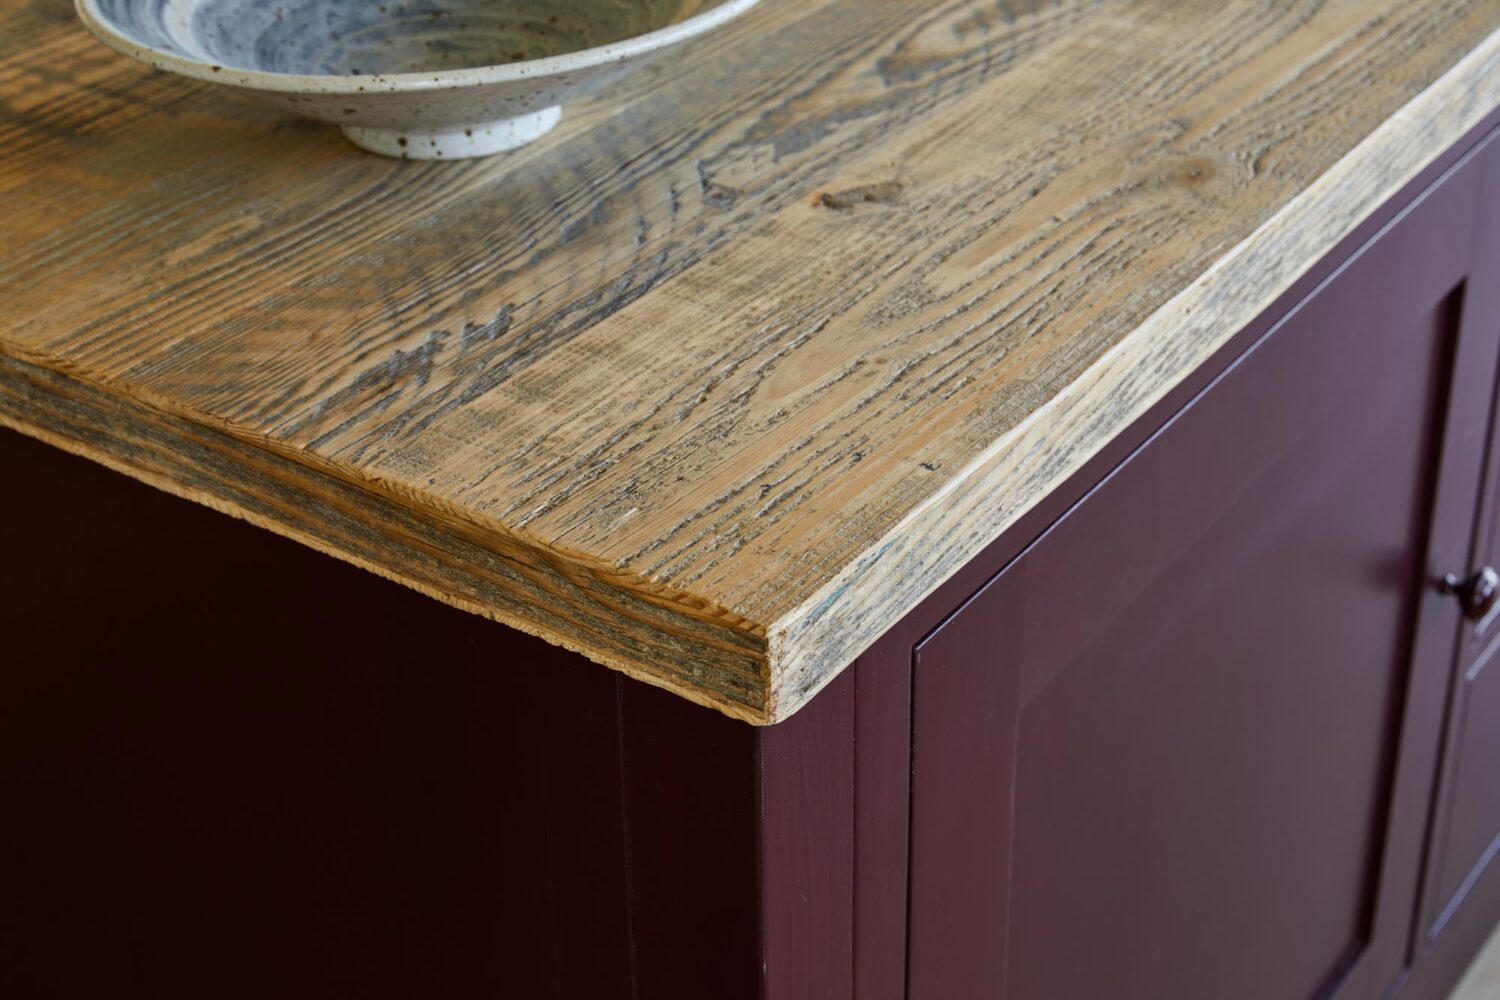 kitchen countertop with reclaimed wood - sustainable kitchen material